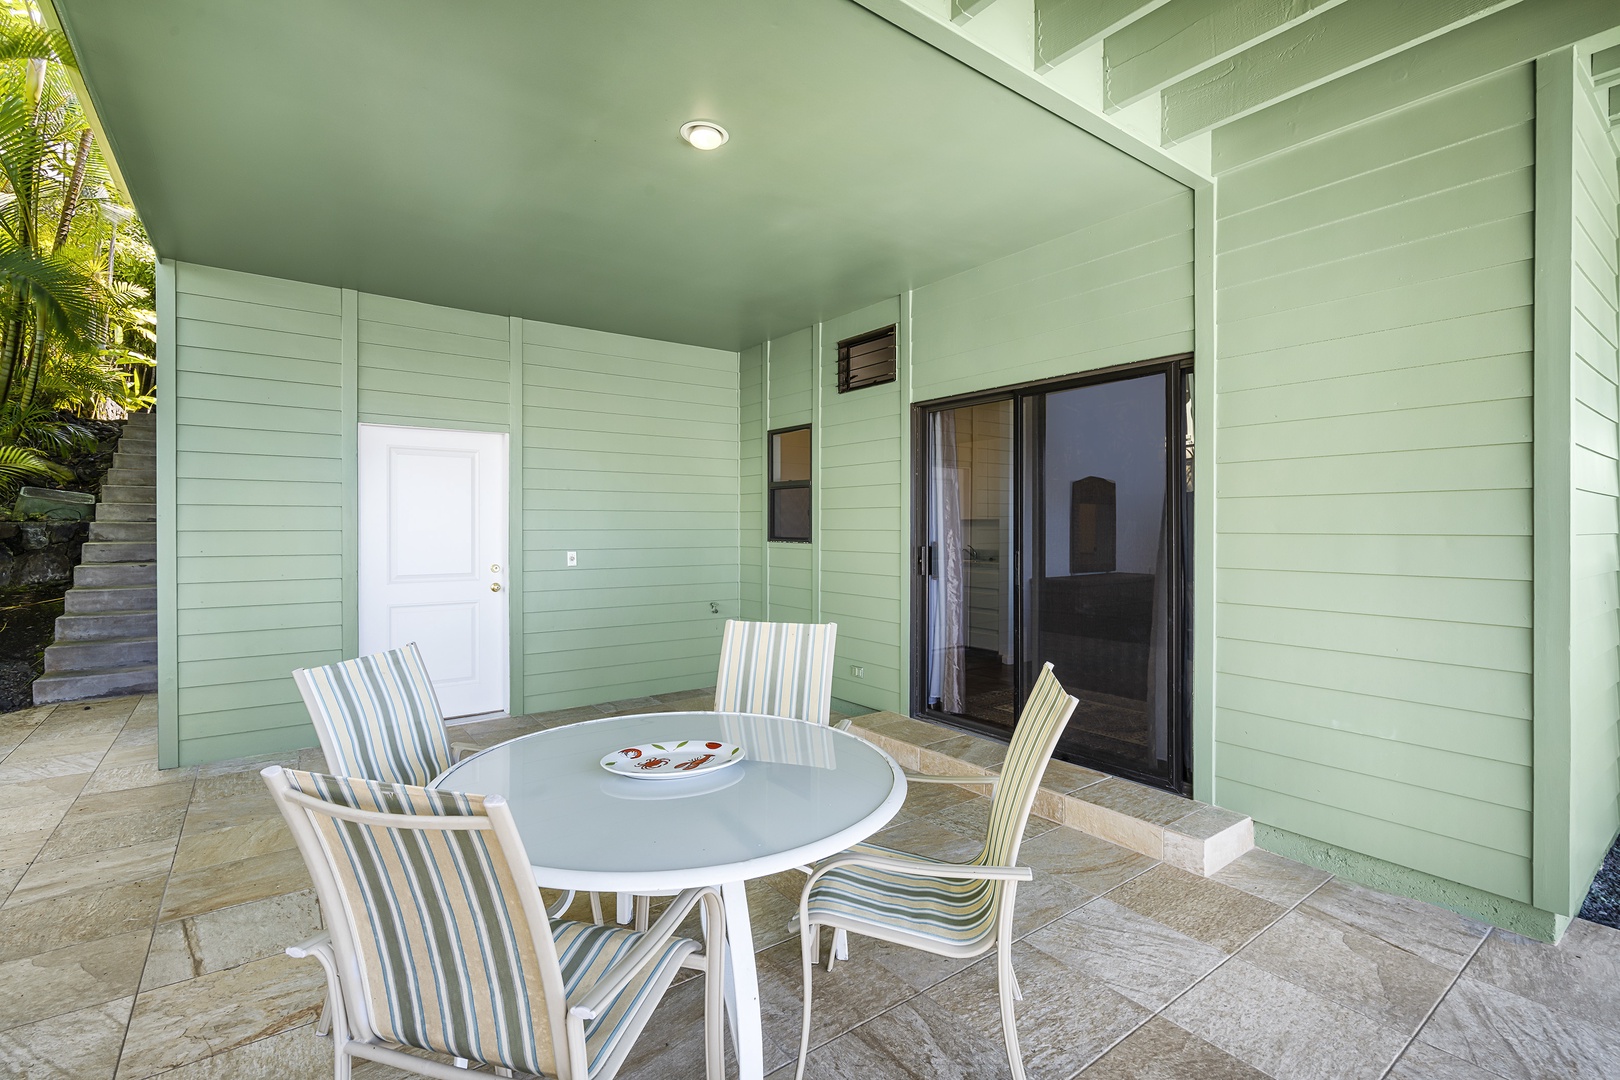 Kailua Kona Vacation Rentals, Ho'o Maluhia - Outdoor table space steps from the downstairs bedroom!